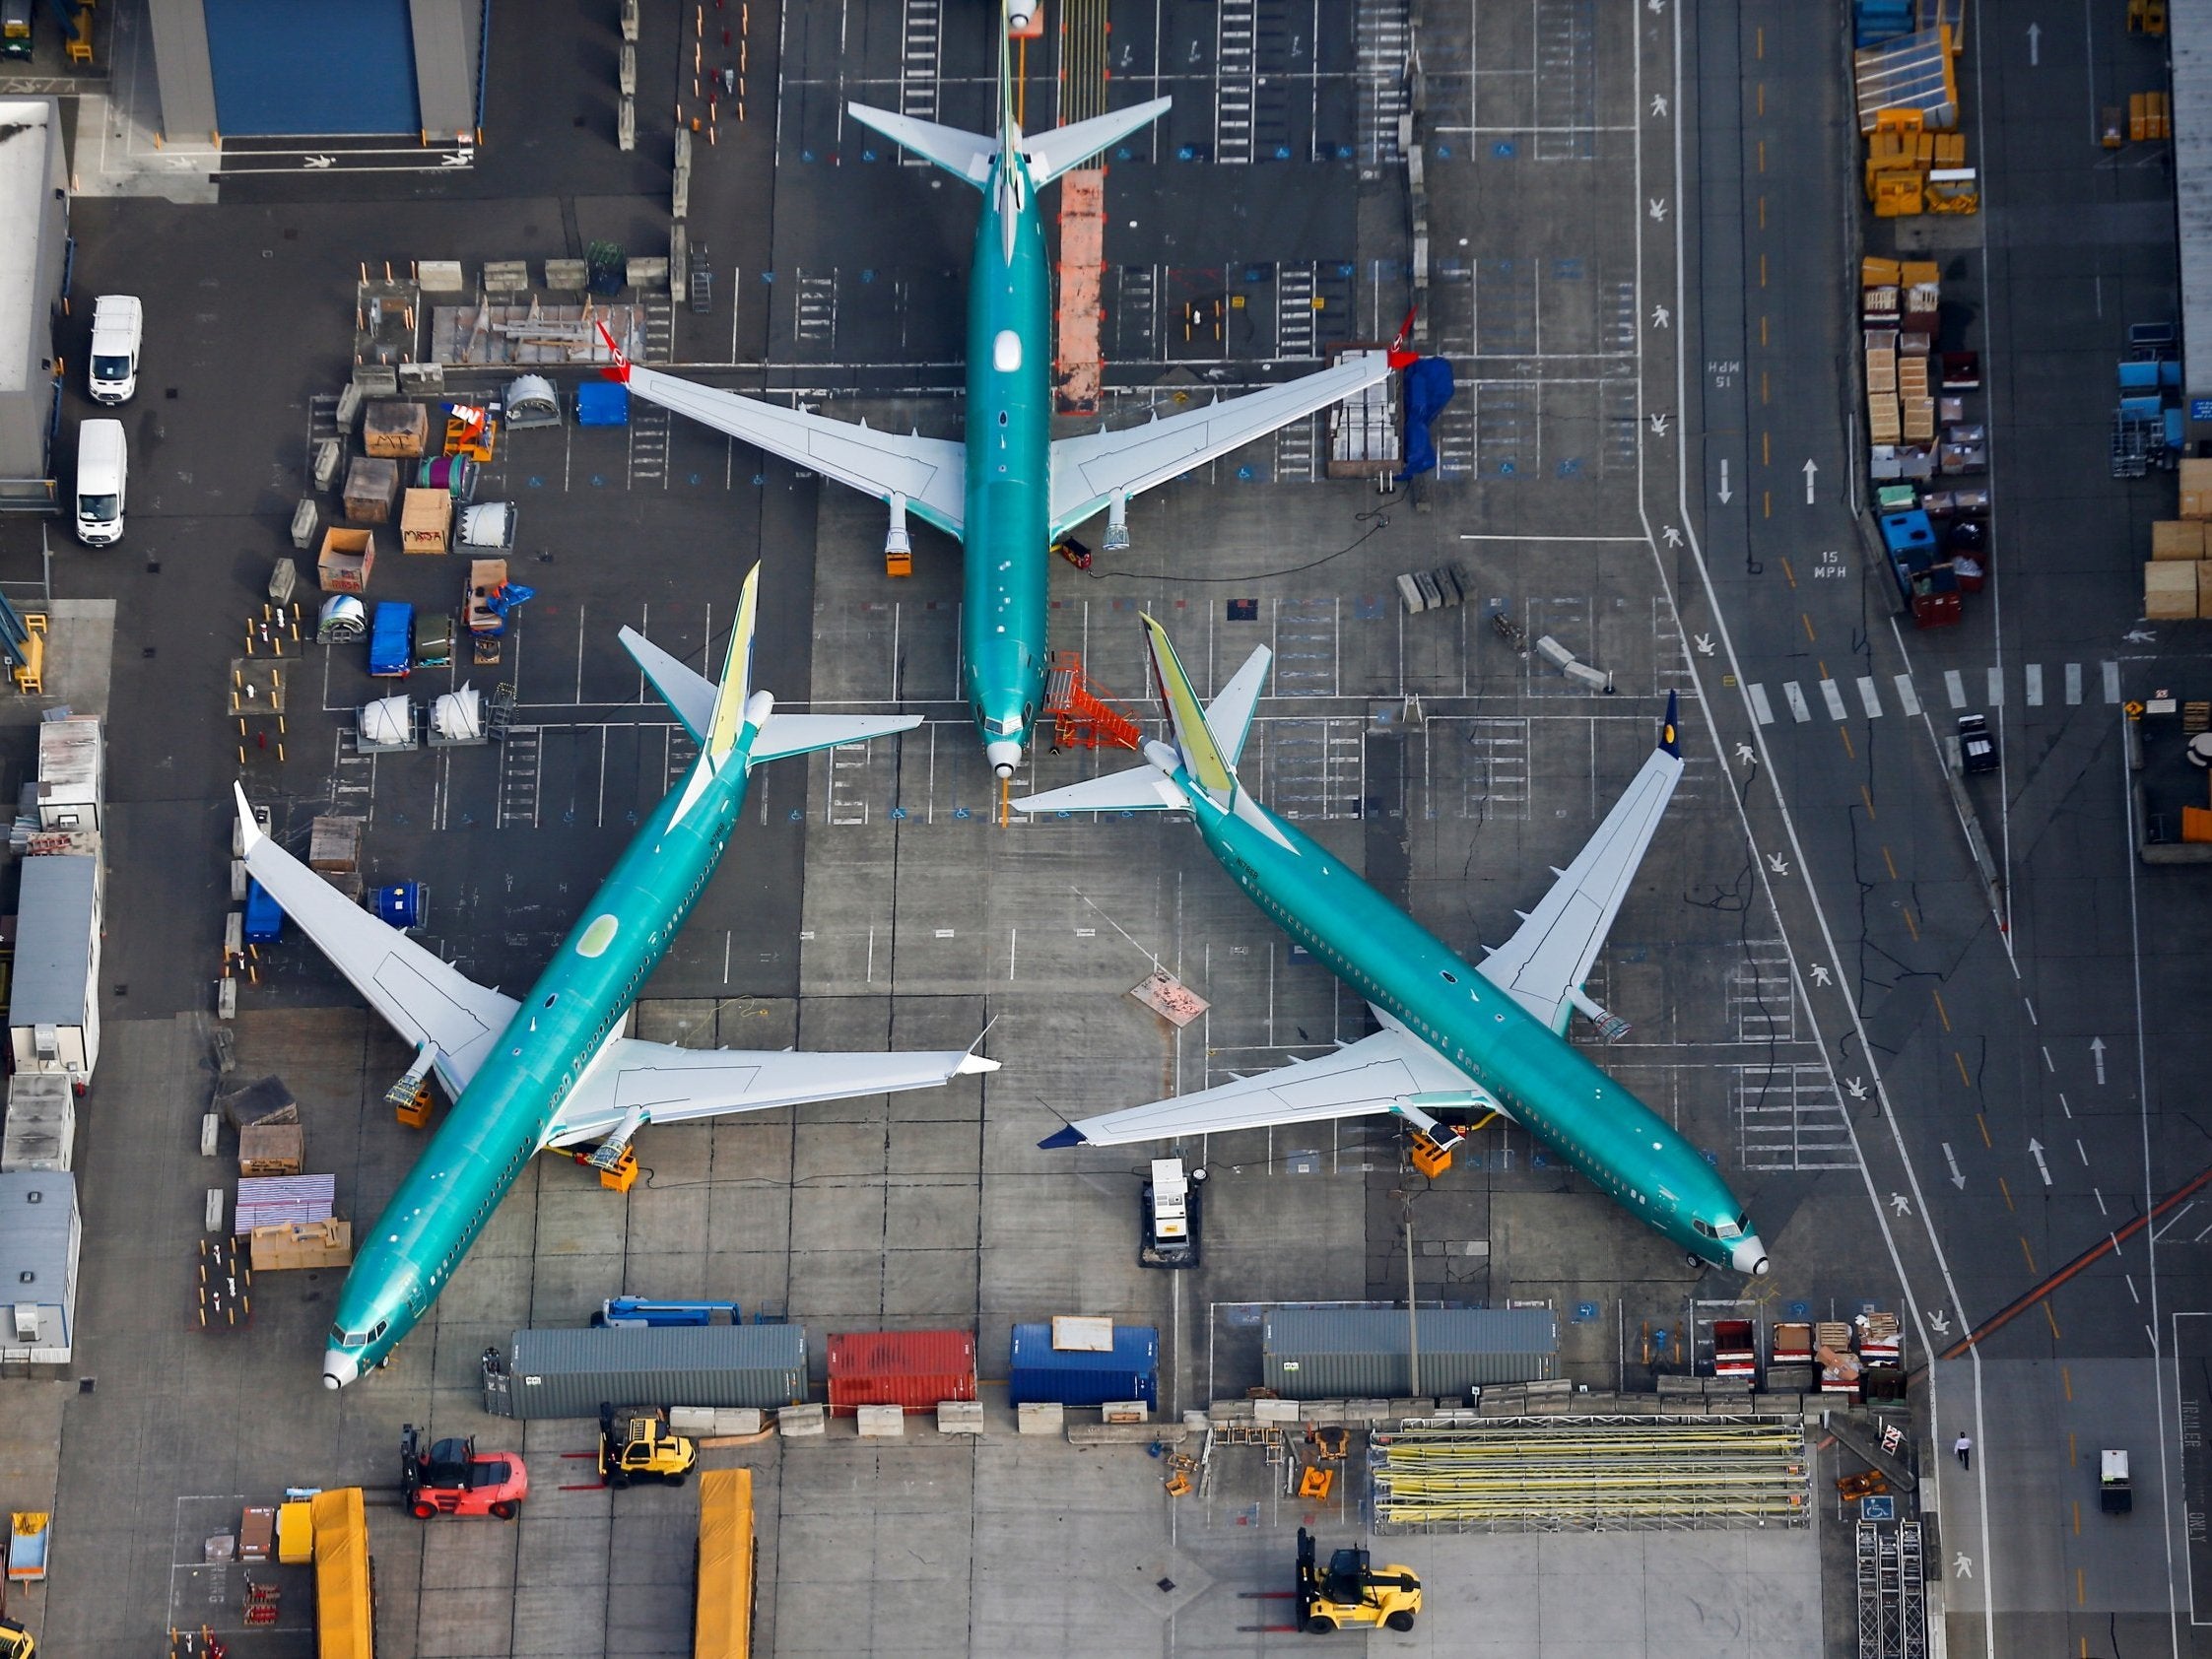 Garuda has cancelled an order for 49 Boeing 737 MAX planes, pictured at the Boeing factory in Renton, Washington